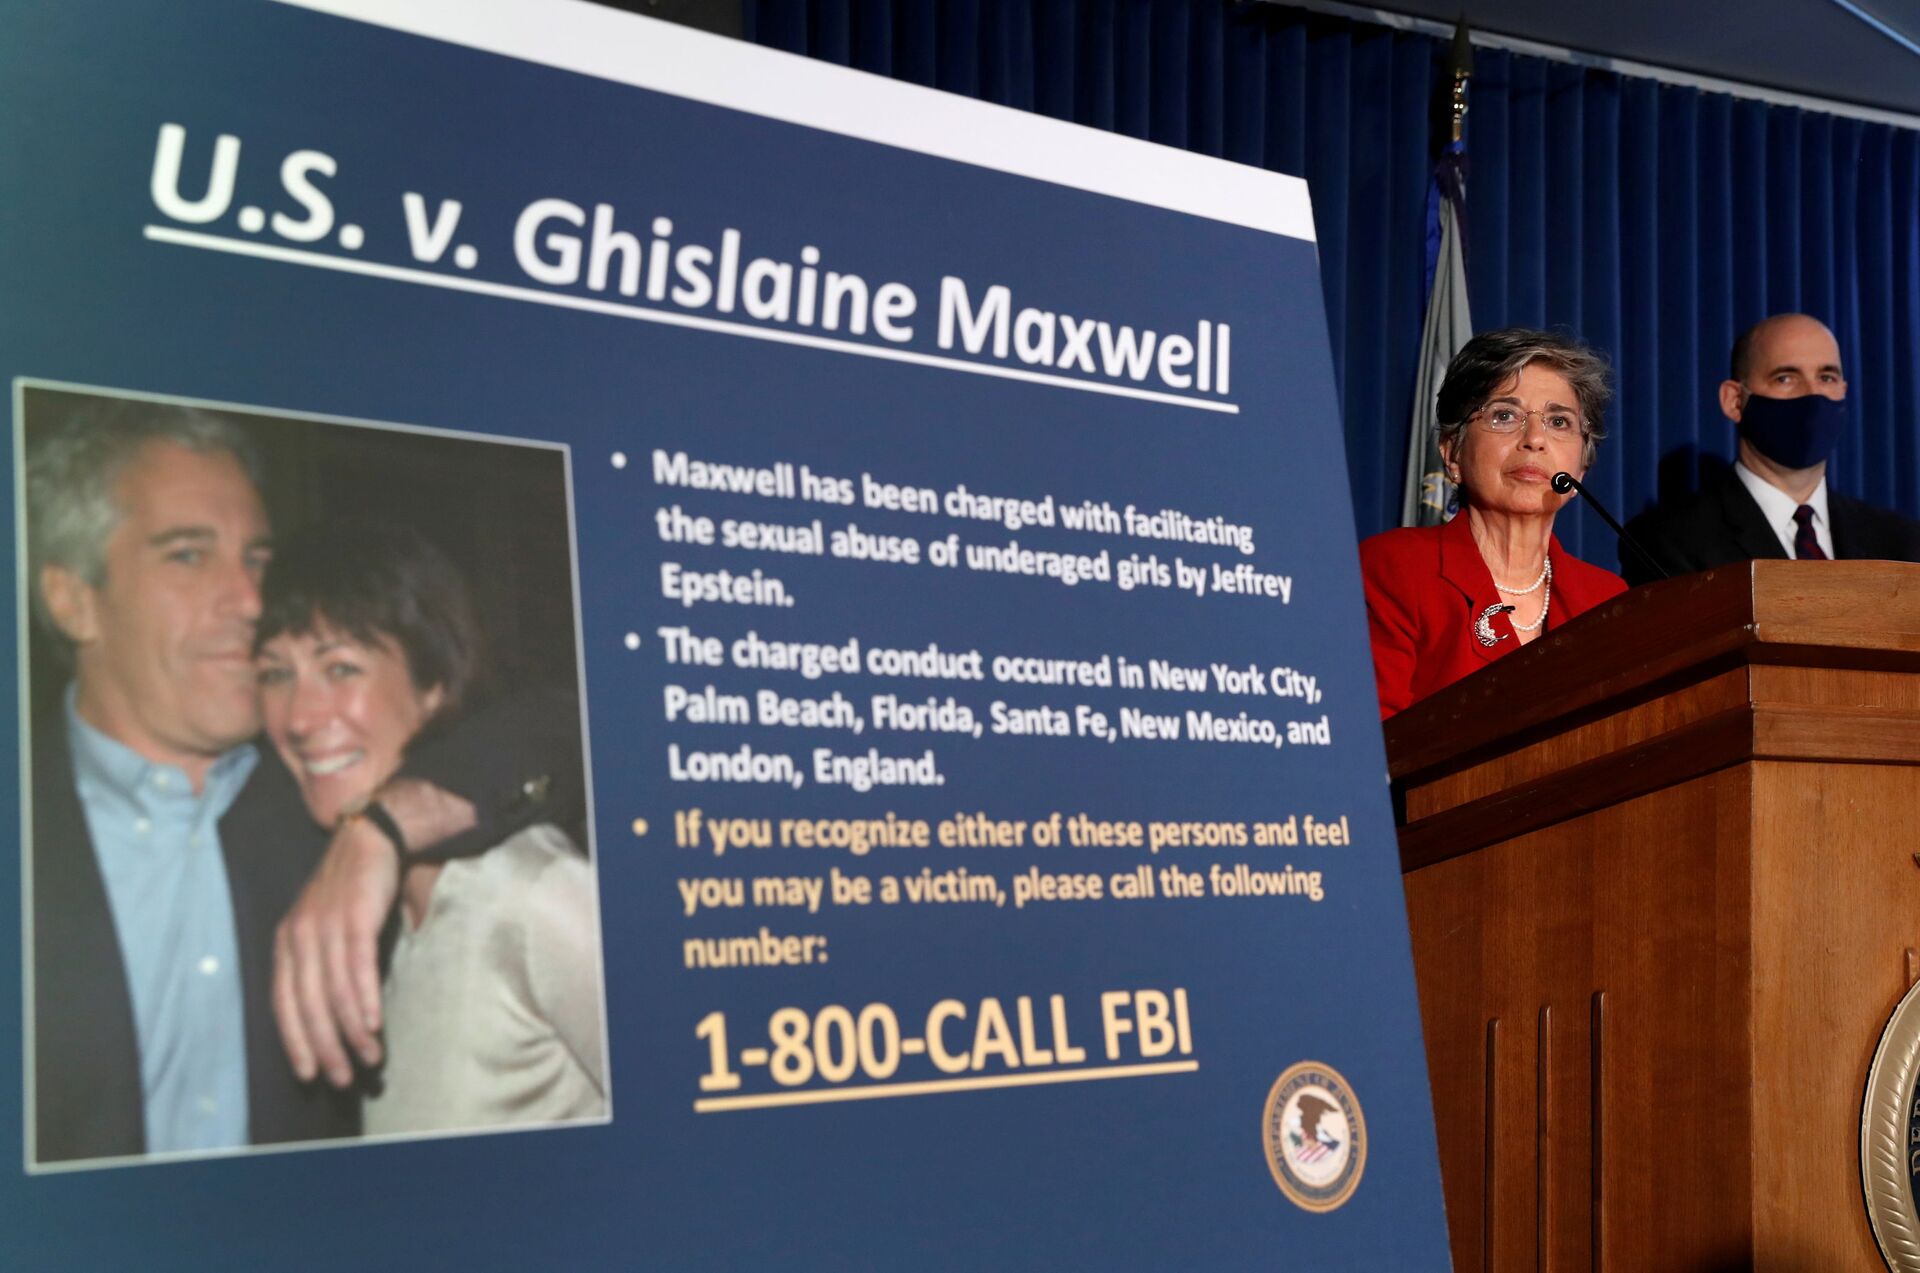 FILE PHOTO: Audrey Strauss, acting U.S. attorney for the Southern District of New York, speaks alongside William F. Sweeney Jr., assistant director-in-charge of the New York Office, at a news conference announcing charges against Ghislaine Maxwell for her alleged role in the sexual exploitation and abuse of minor girls by Jeffrey Epstein in New York City, New York, U.S., July 2, 2020 - Sputnik International, 1920, 30.10.2021